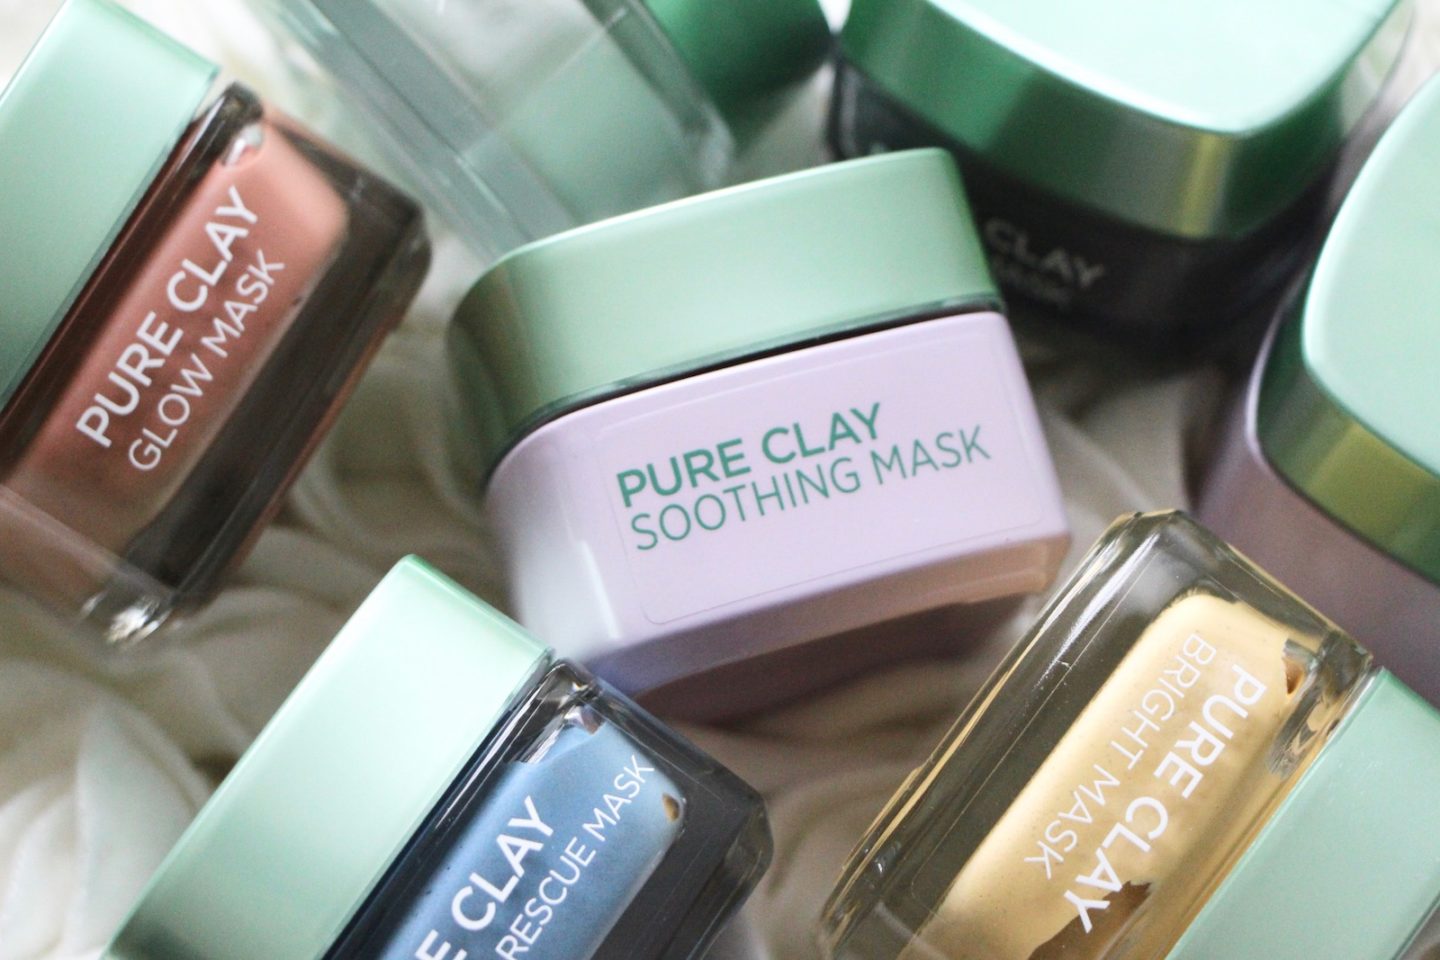 L'Oreal Pure Clay Soothing Mask